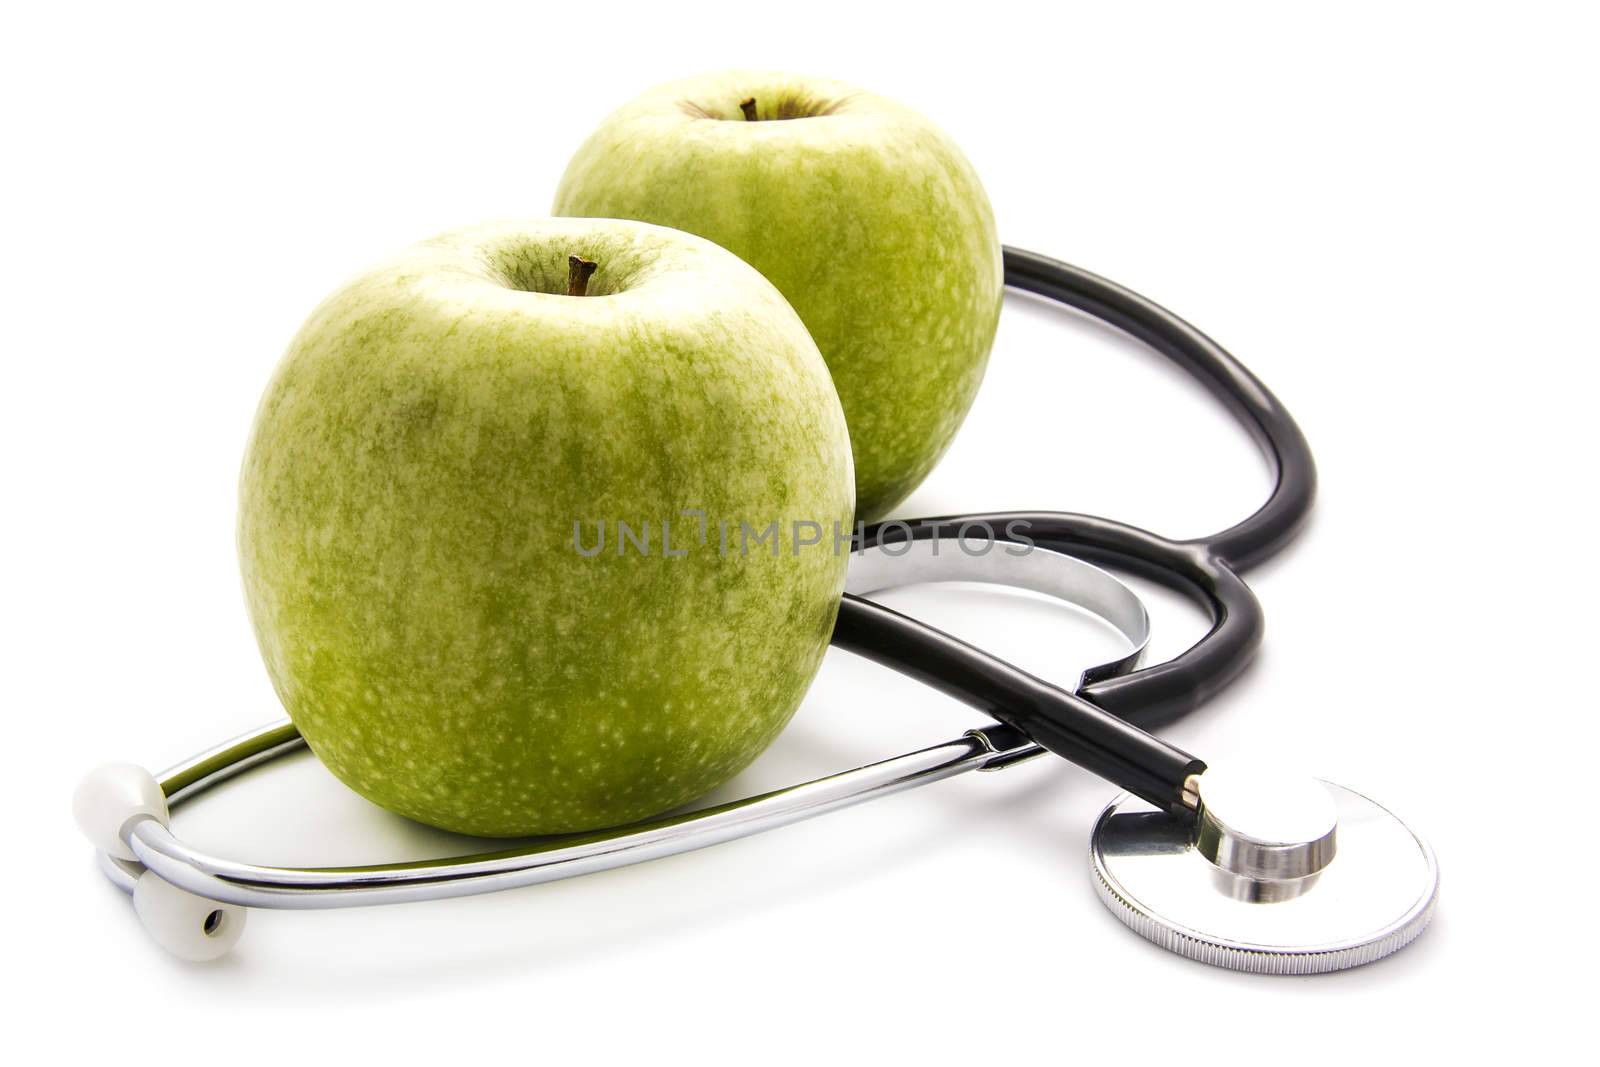 Apples and stethoscope background by dynamicfoto